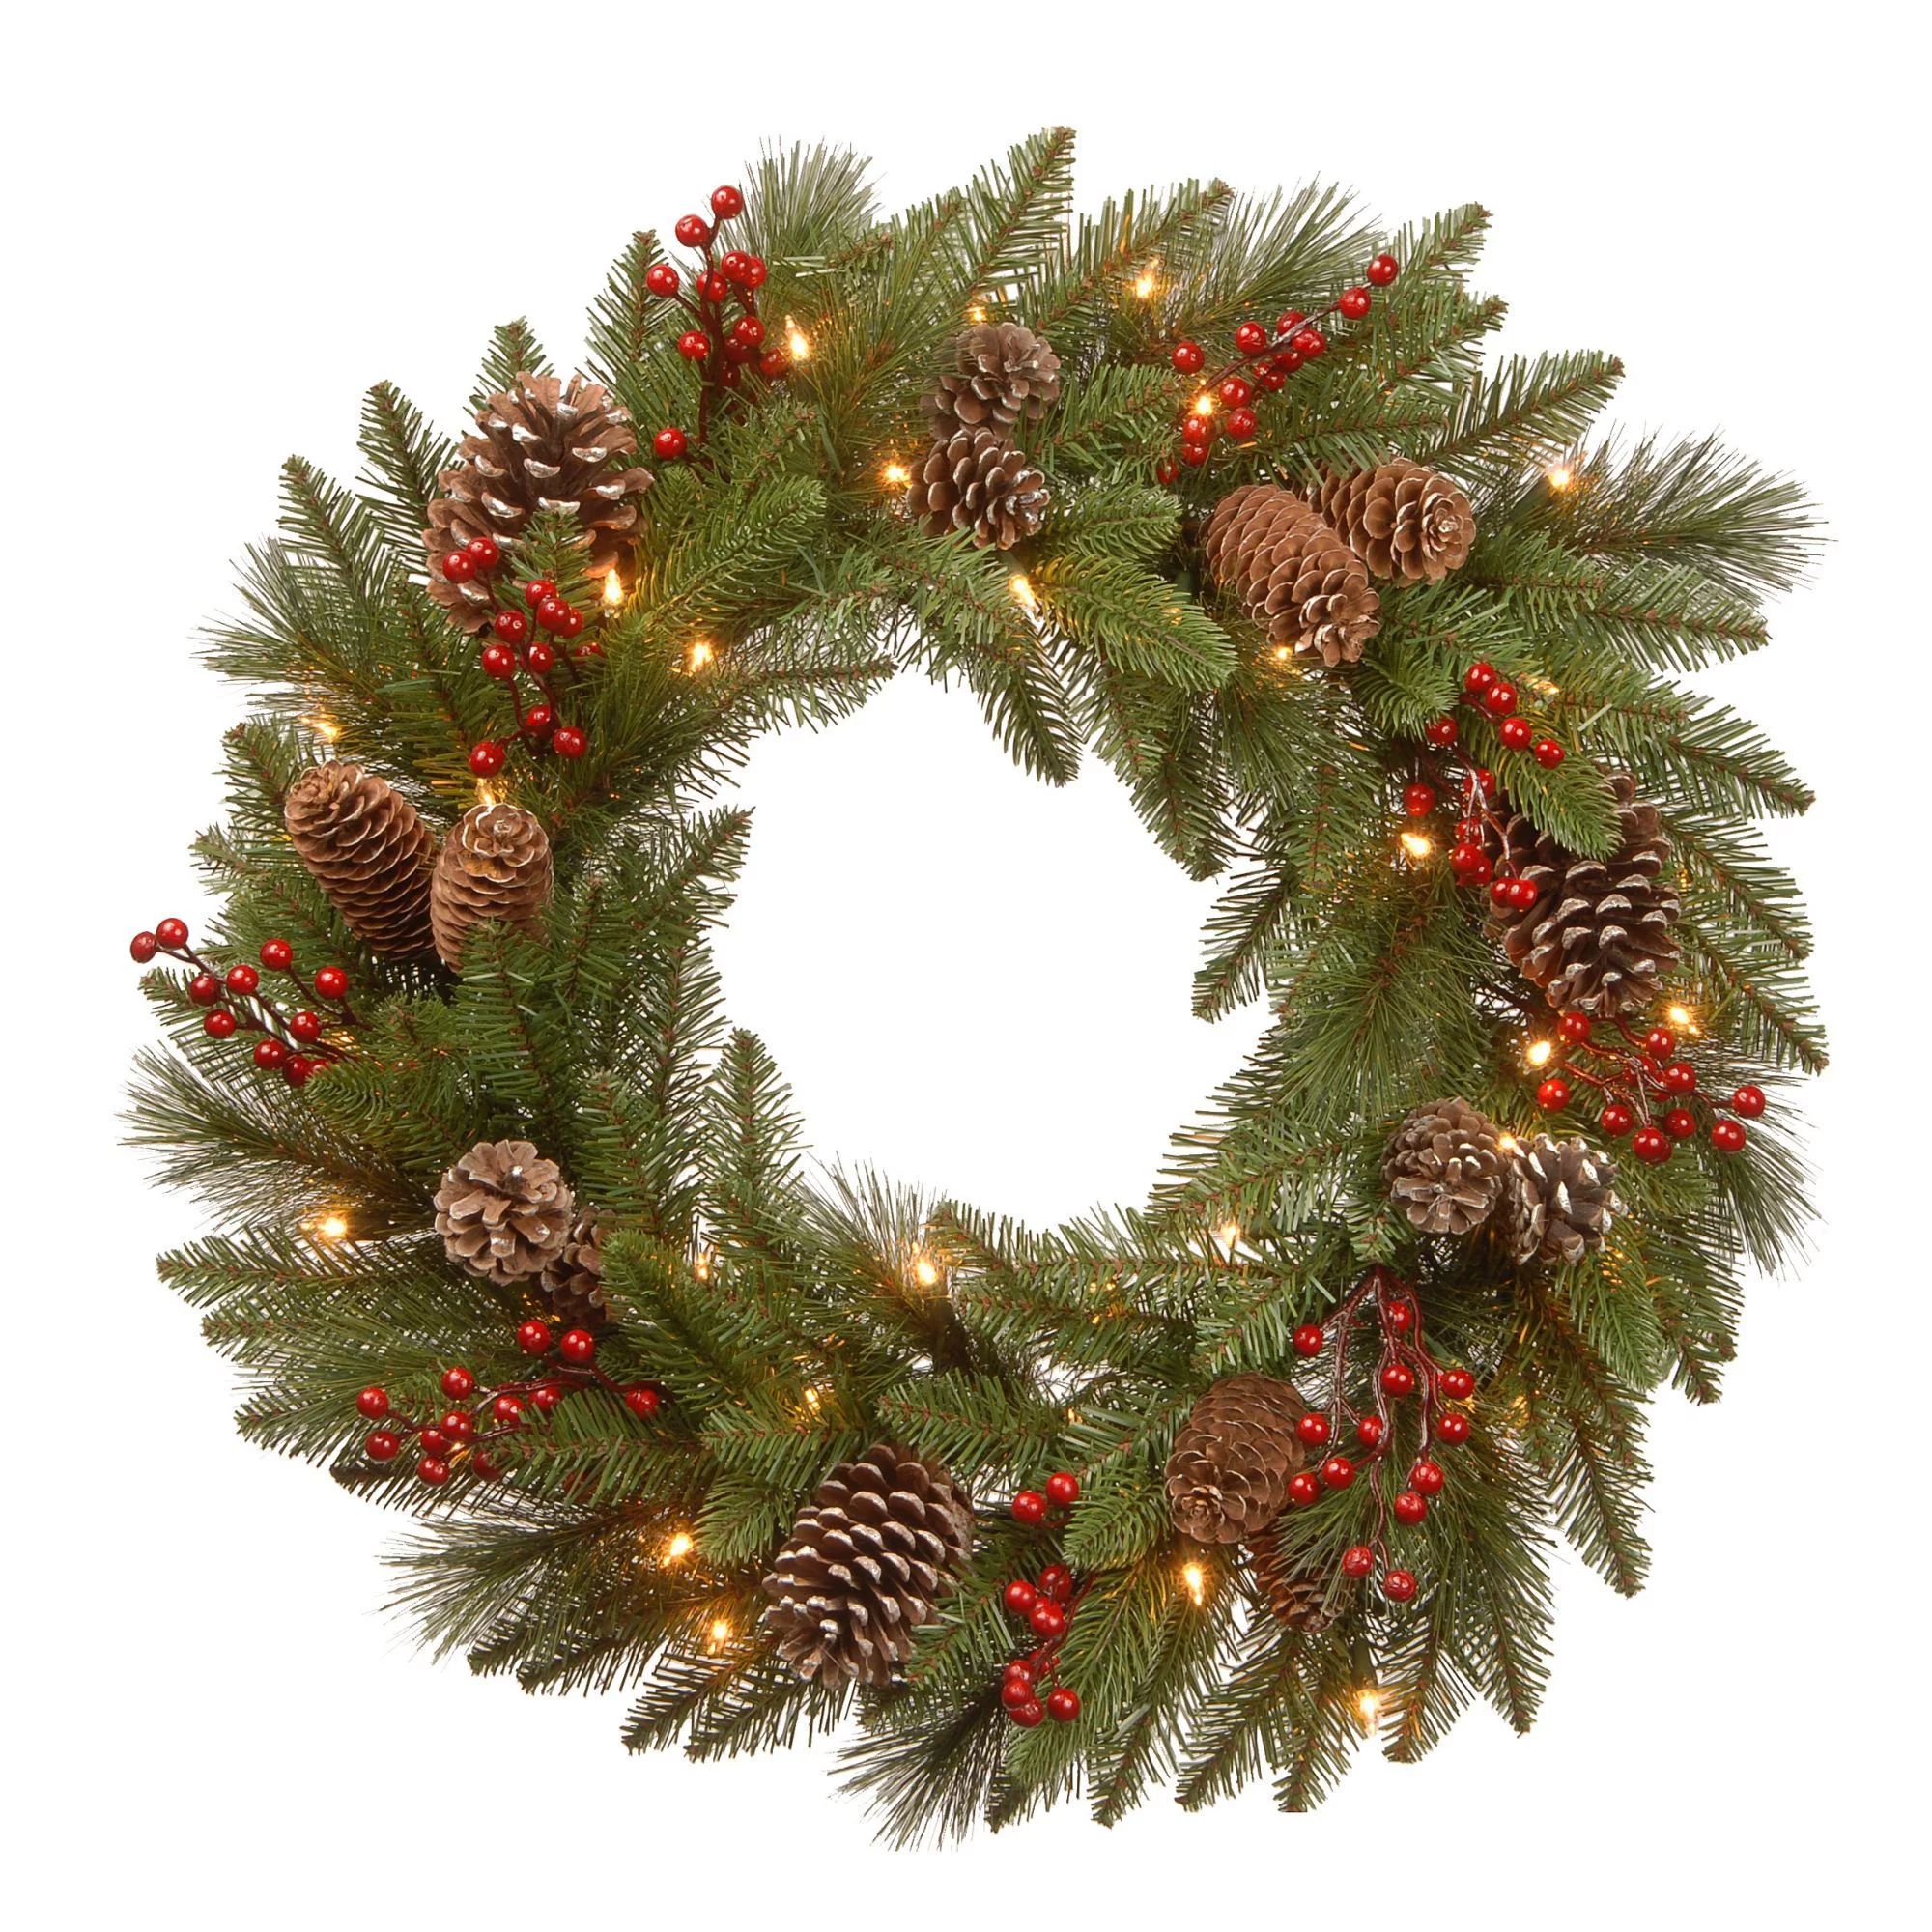 30" Pre-Lit Bristle Berry Battery Operated Artificial Christmas Wreath - Warm White LED Lights - ... | Walmart (US)